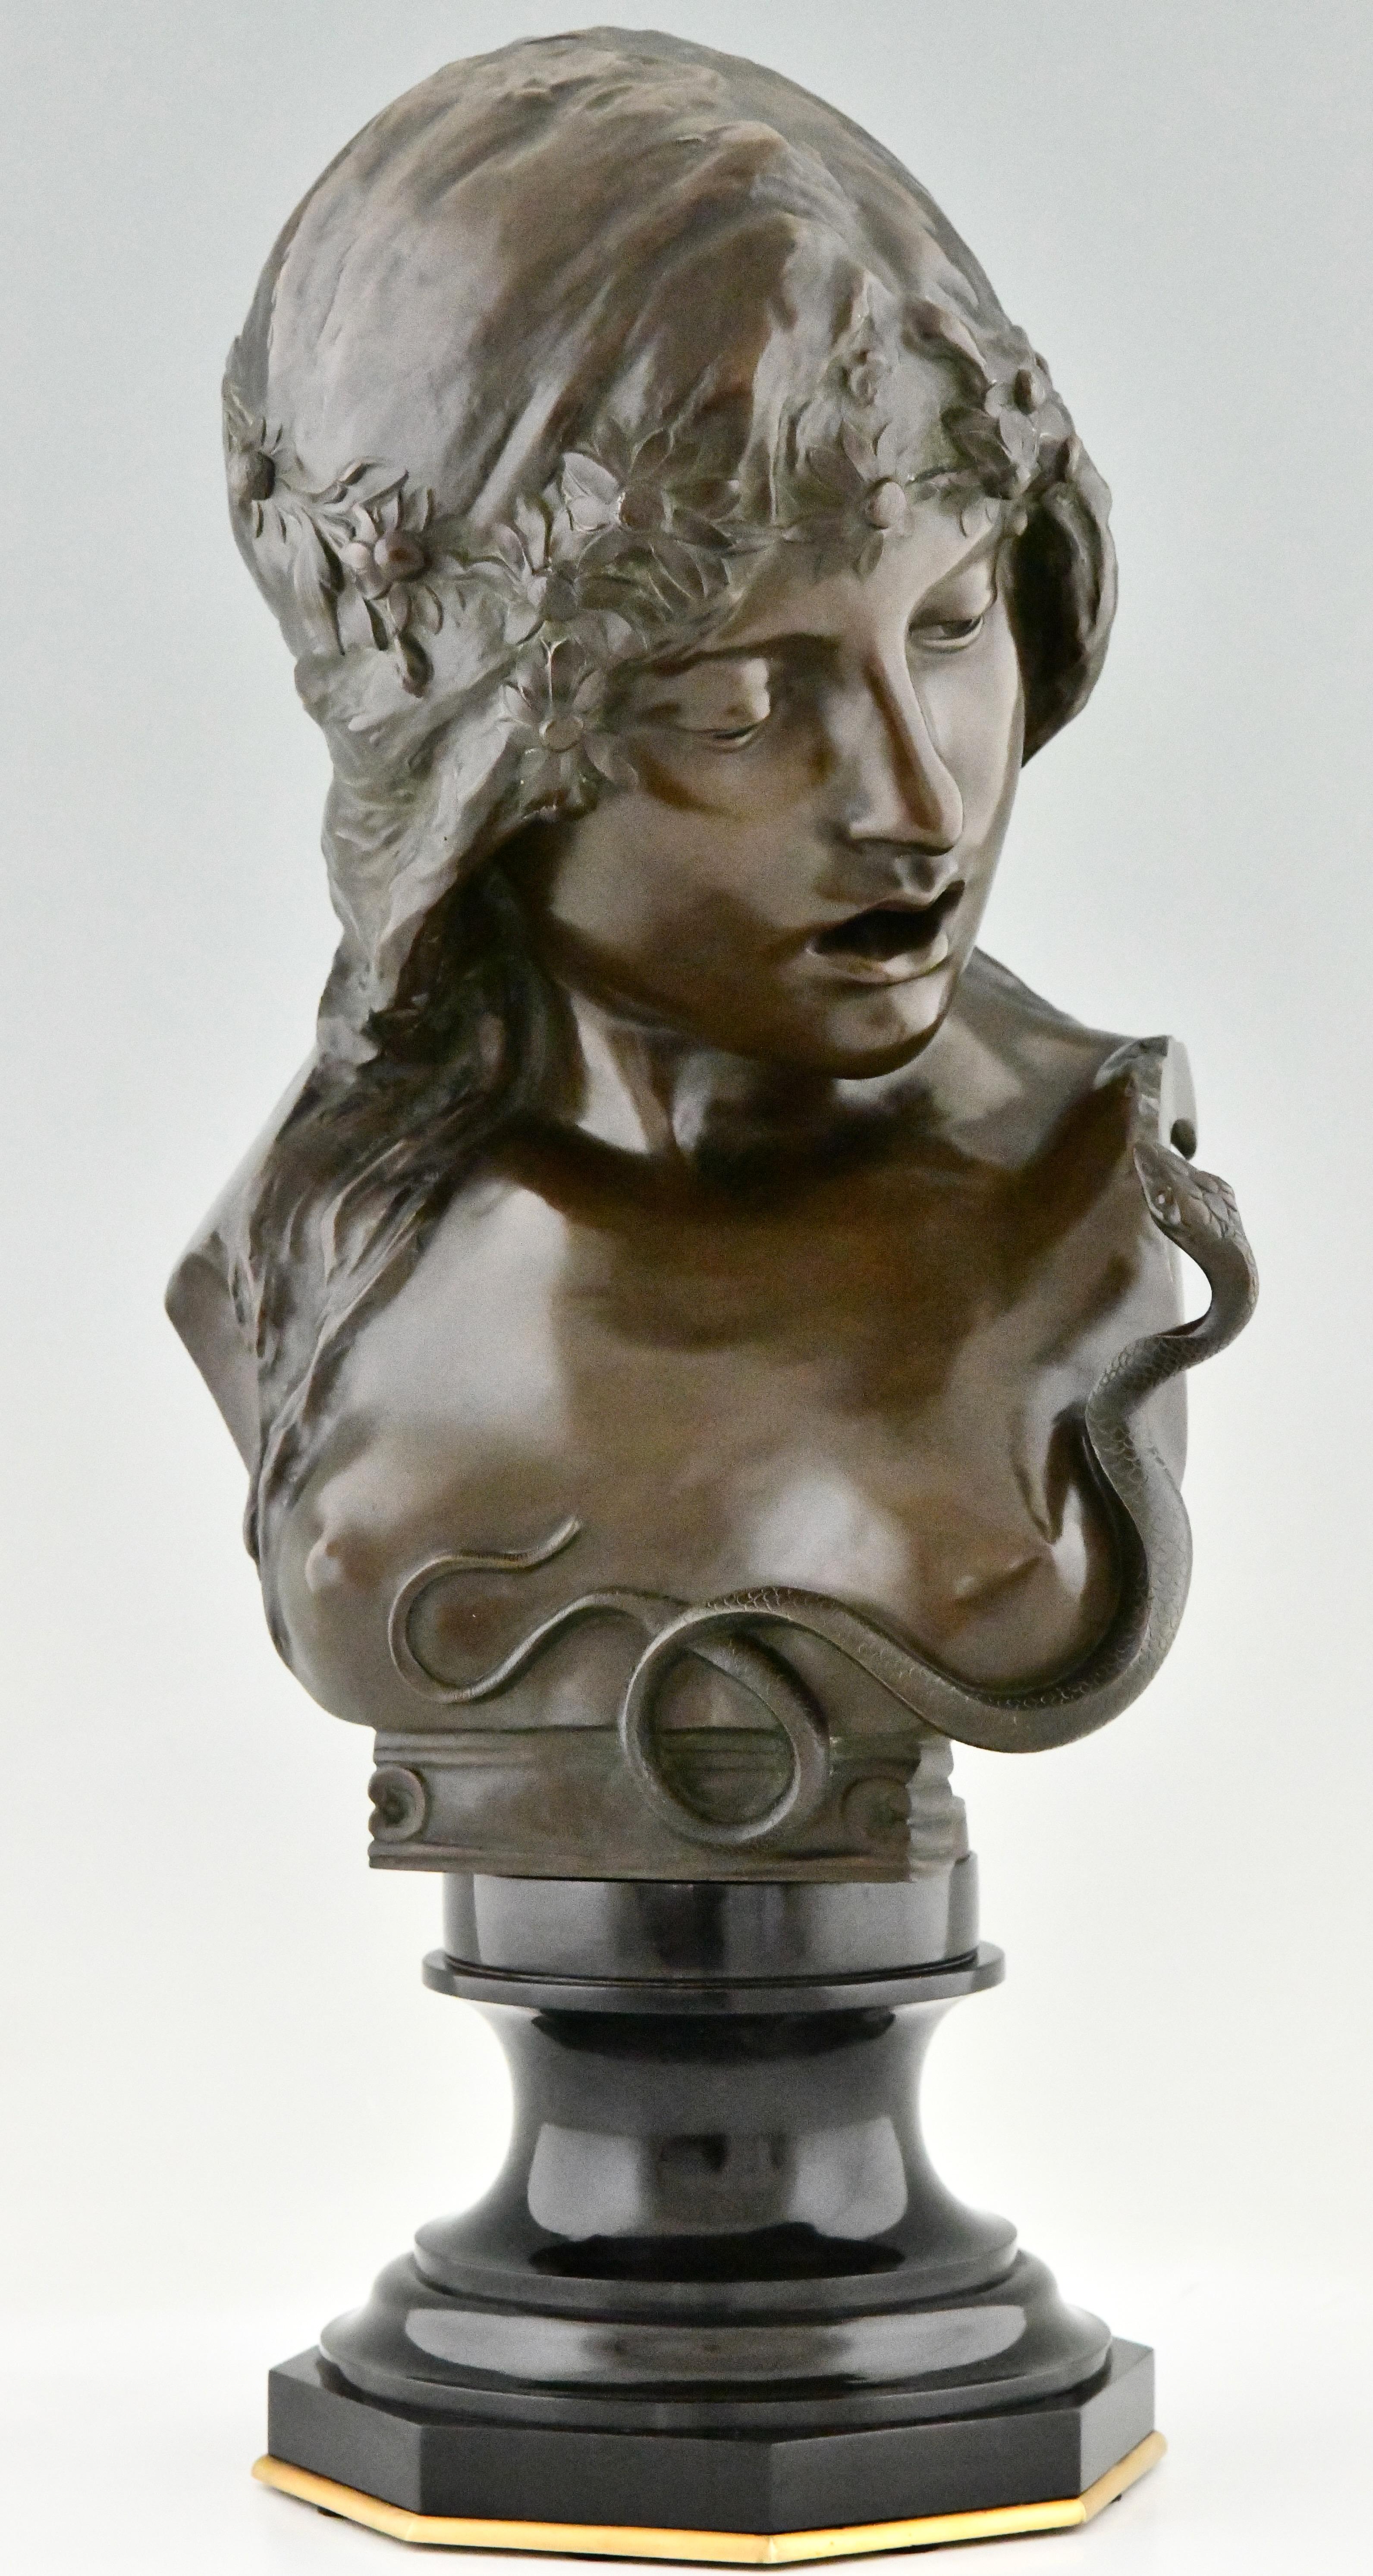 Cleopatra, Art Nouveau bronze bust woman with snake by Isidore De Rudder
With foundry seal Luppens & Cie, Bruxelles. 
Patinated bronze on a Belgian Black marble & bronze base.  
Illustration of this model in:
Beeldhouwkunst in België, Engelen Marx.